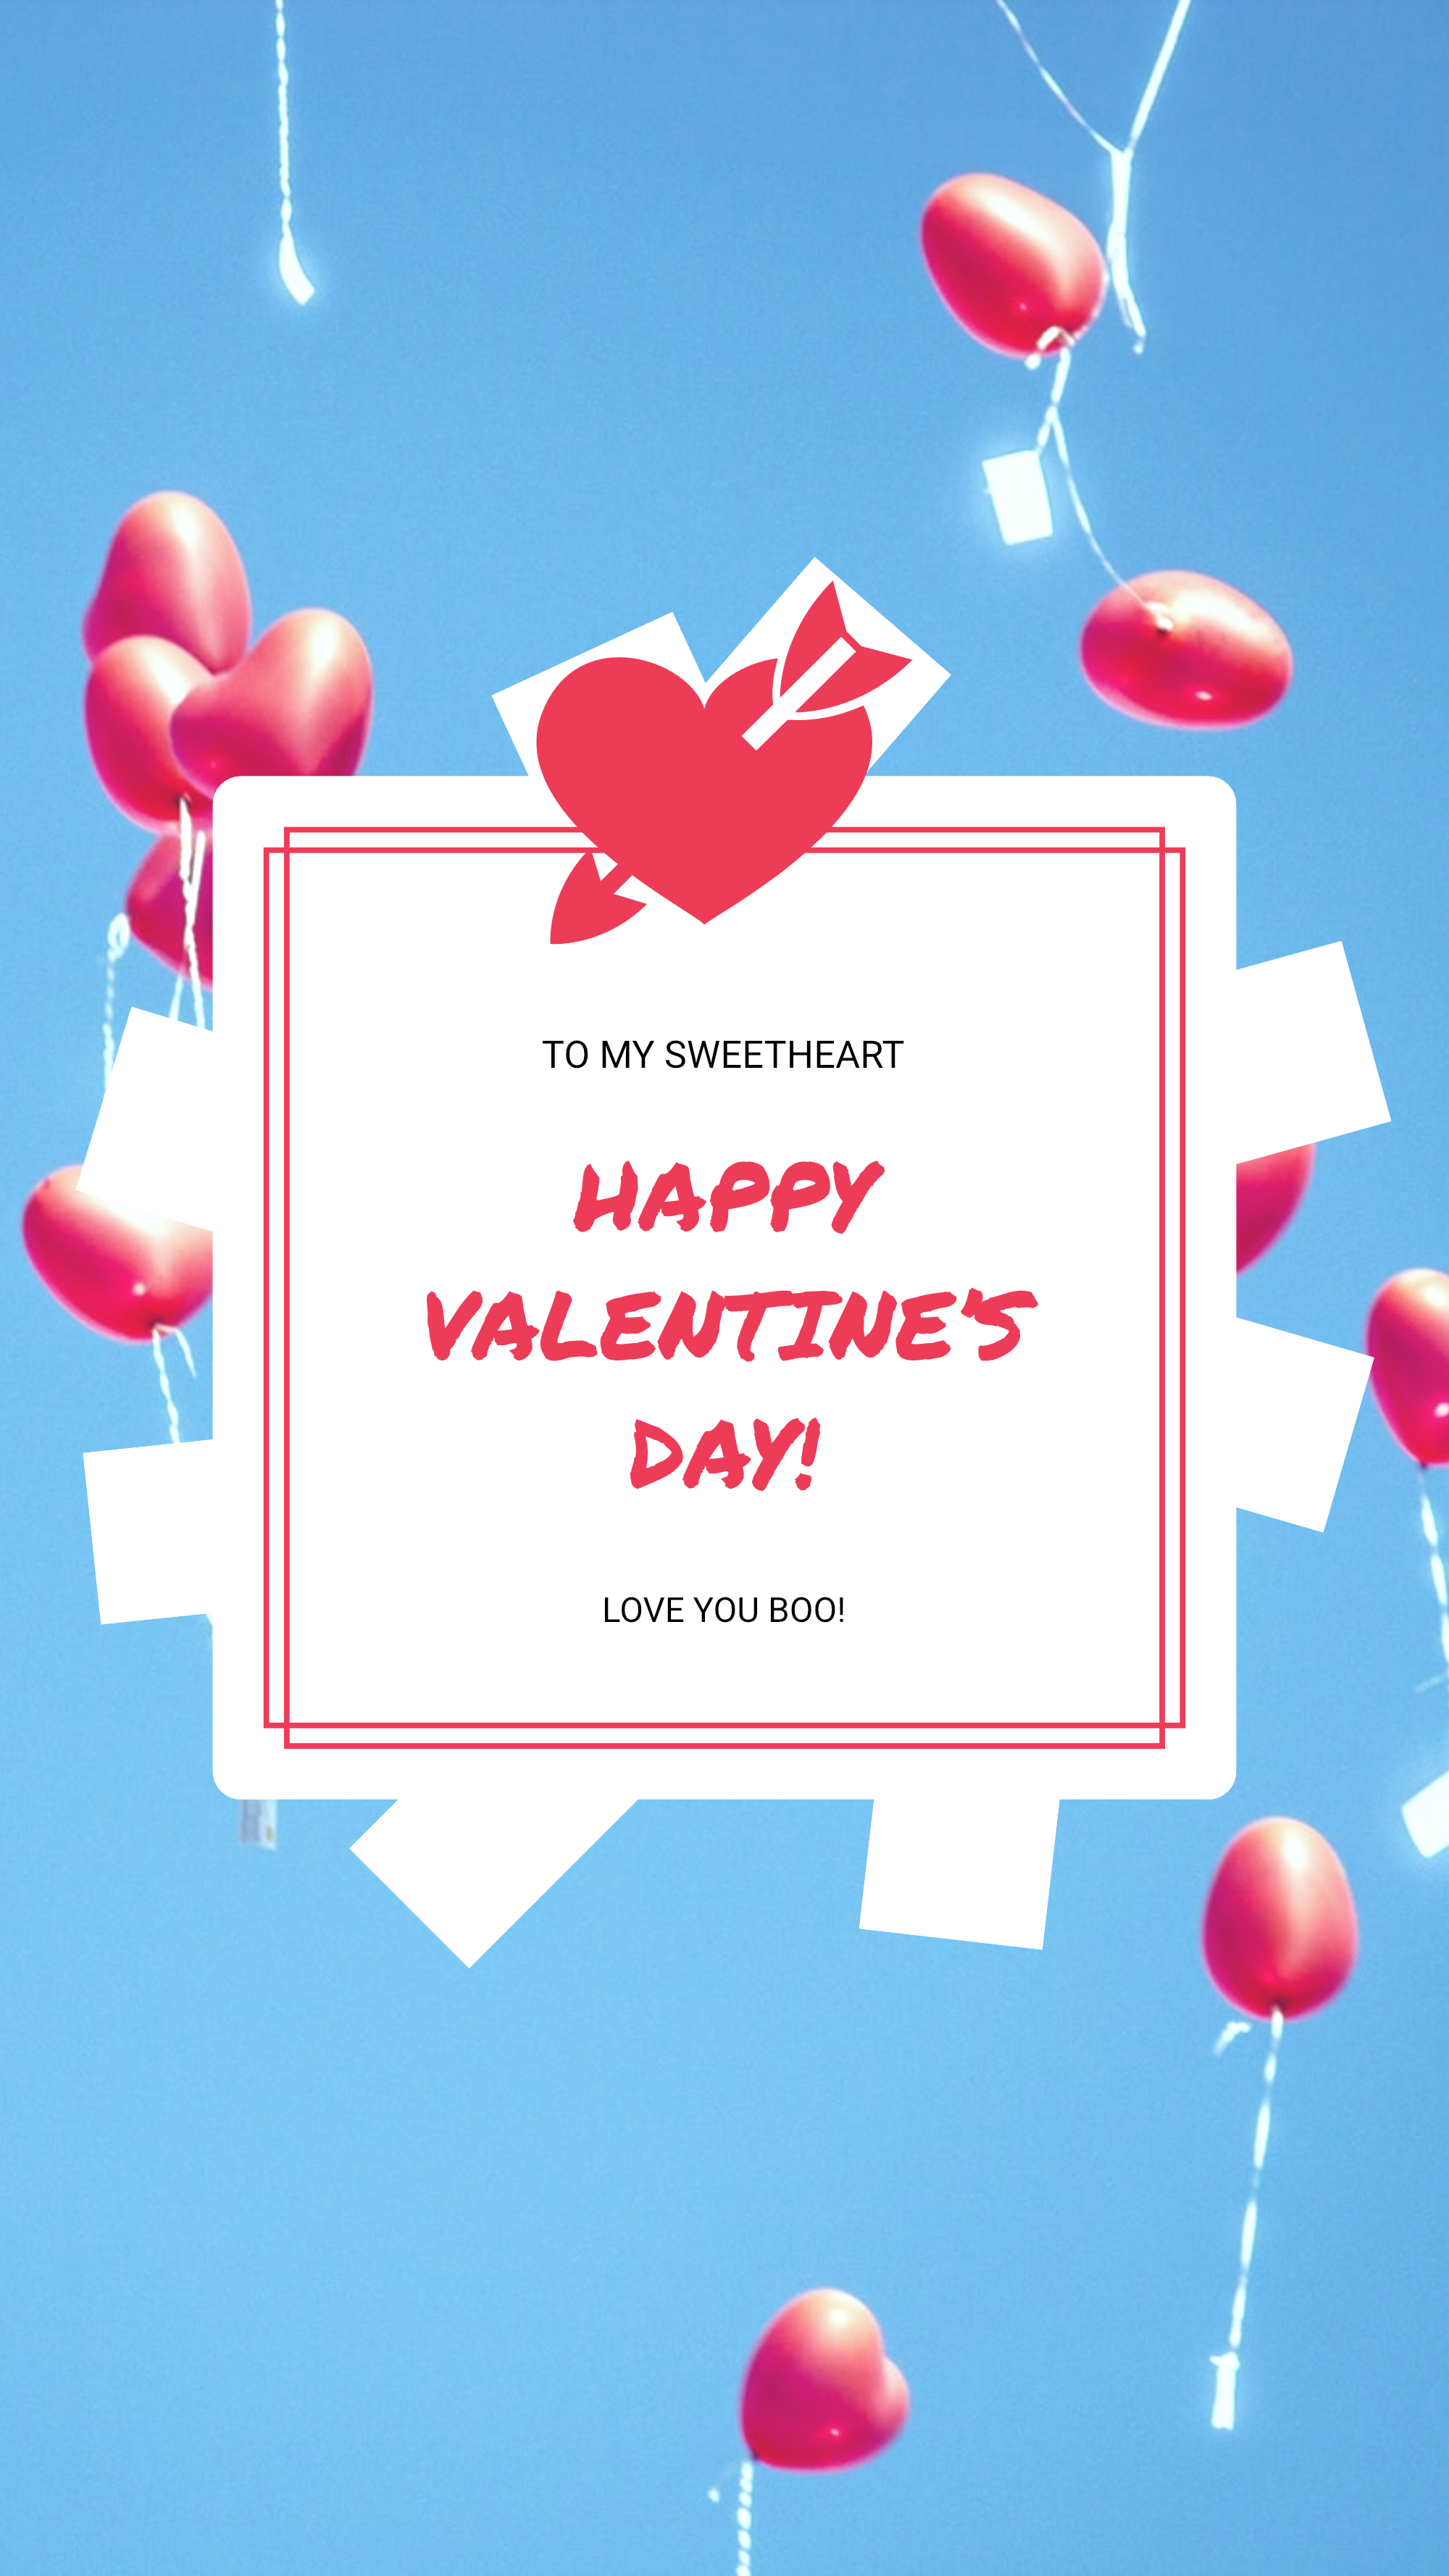 31 VALENTINE'S DAY Story Ideas + FREE Templates (2019)